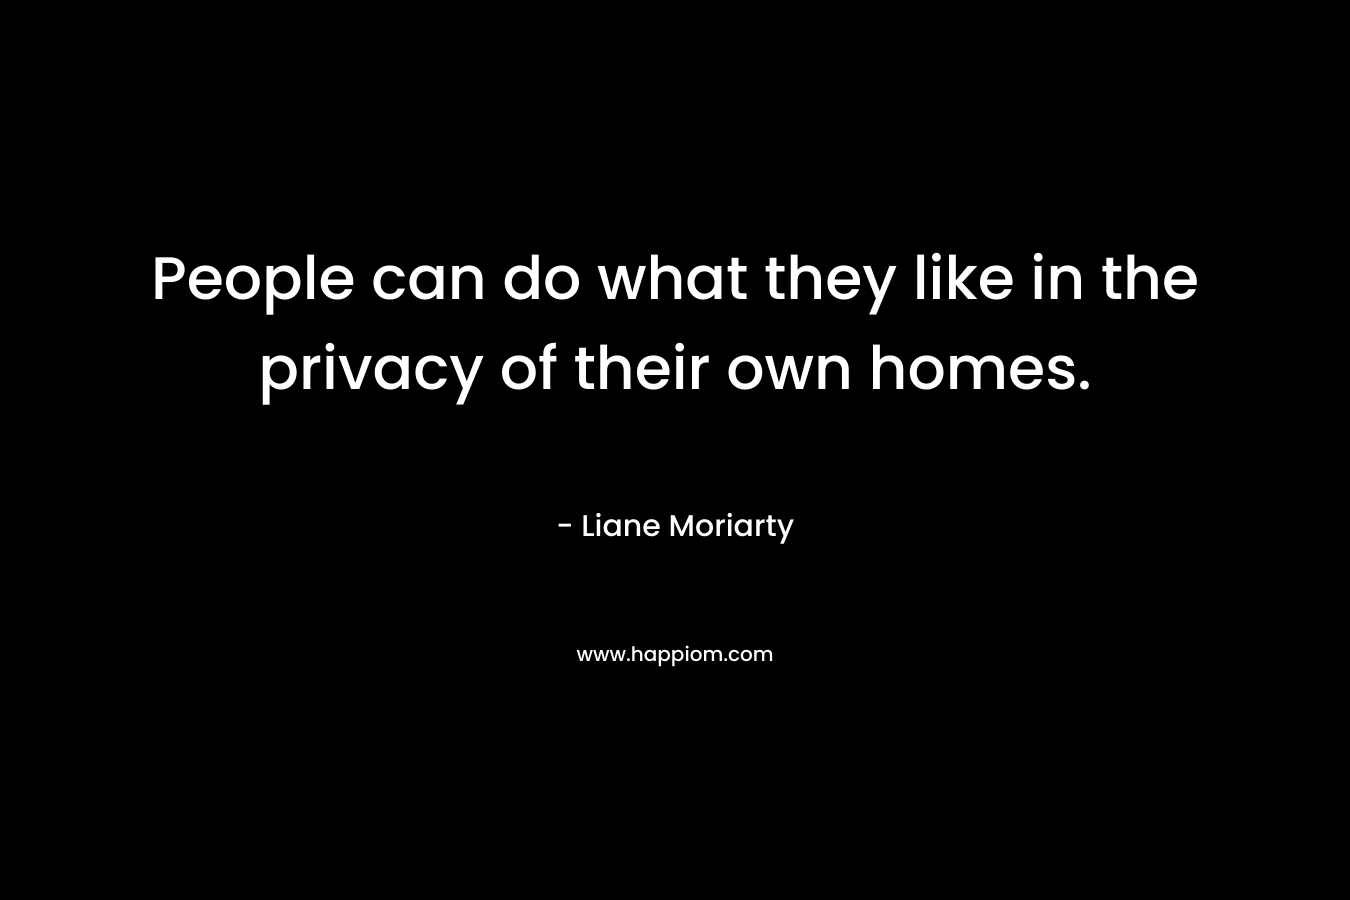 People can do what they like in the privacy of their own homes. – Liane Moriarty